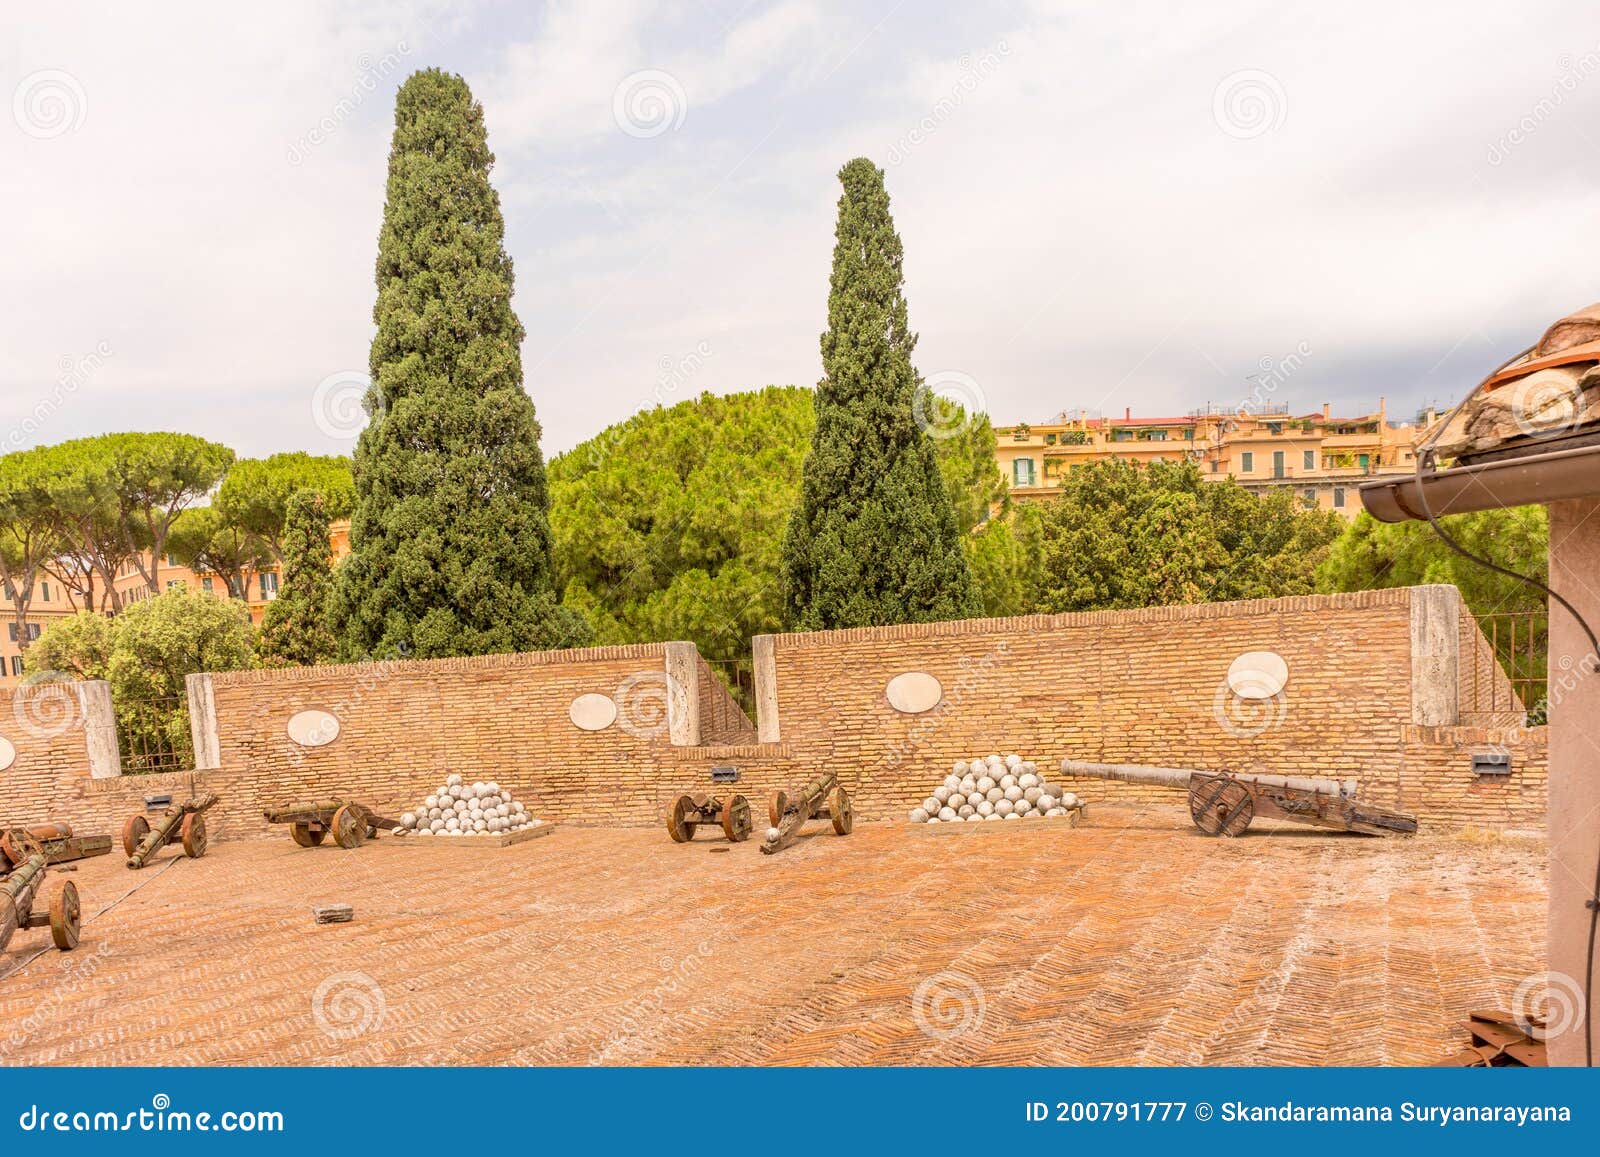 Rome, Italy - 23 June 2018: Ancient Catapult Cannon Weapon with Cannon ...